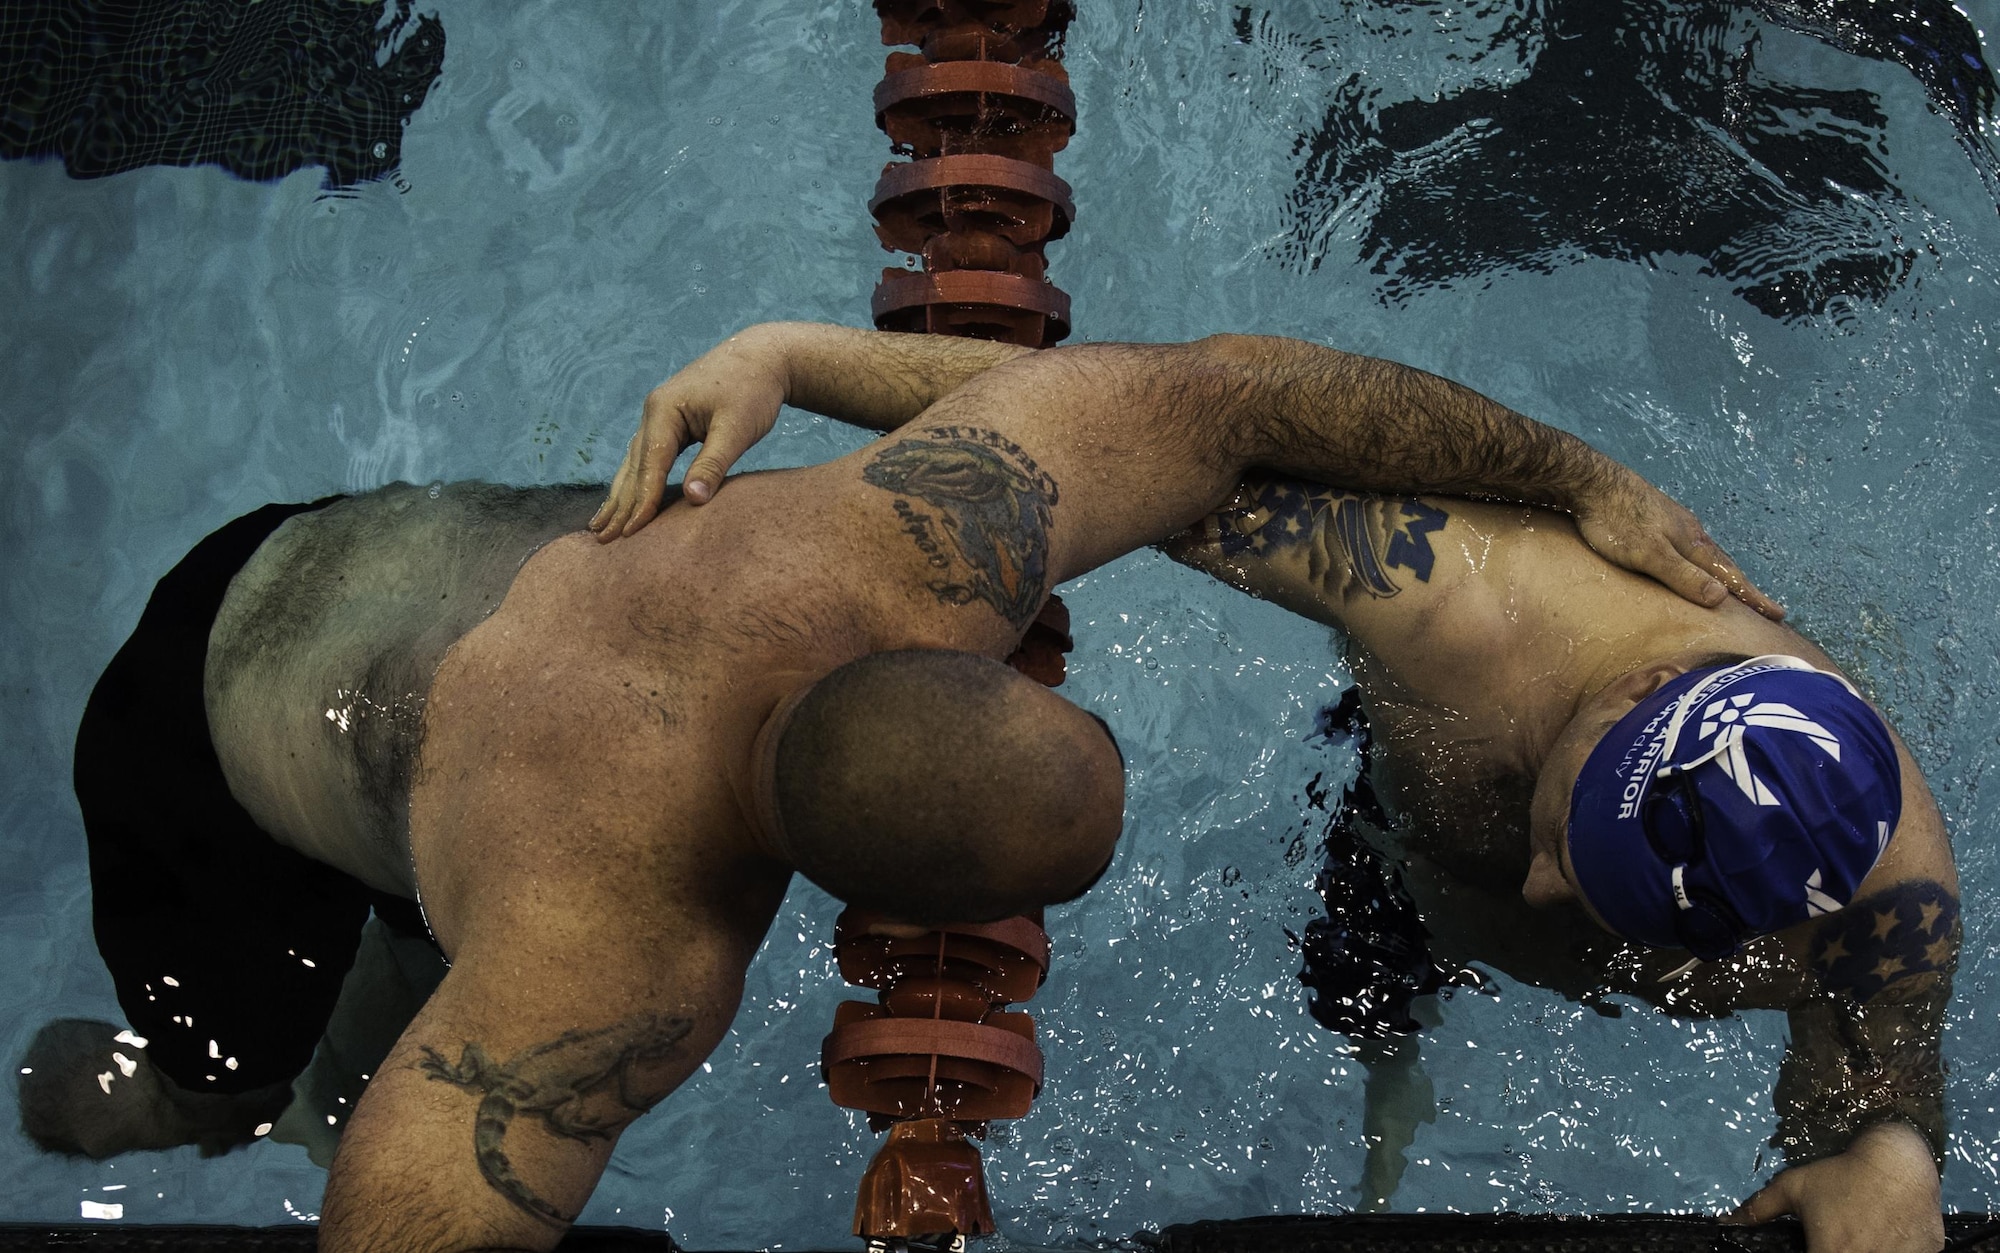 Two Air Force Wounded Warrior Trials competitors embrace after finishing the men’s 50 meter freestyle during the AFW2 at the University of Nevada Las Vegas pool, Feb. 26, 2017. The Air Force Trials are an adaptive sports event designed to promote the mental and physical well-being of seriously ill and injured military members and veterans. (U.S. Air Force photo by Airman 1st Class Kevin Tanenbaum/Released)